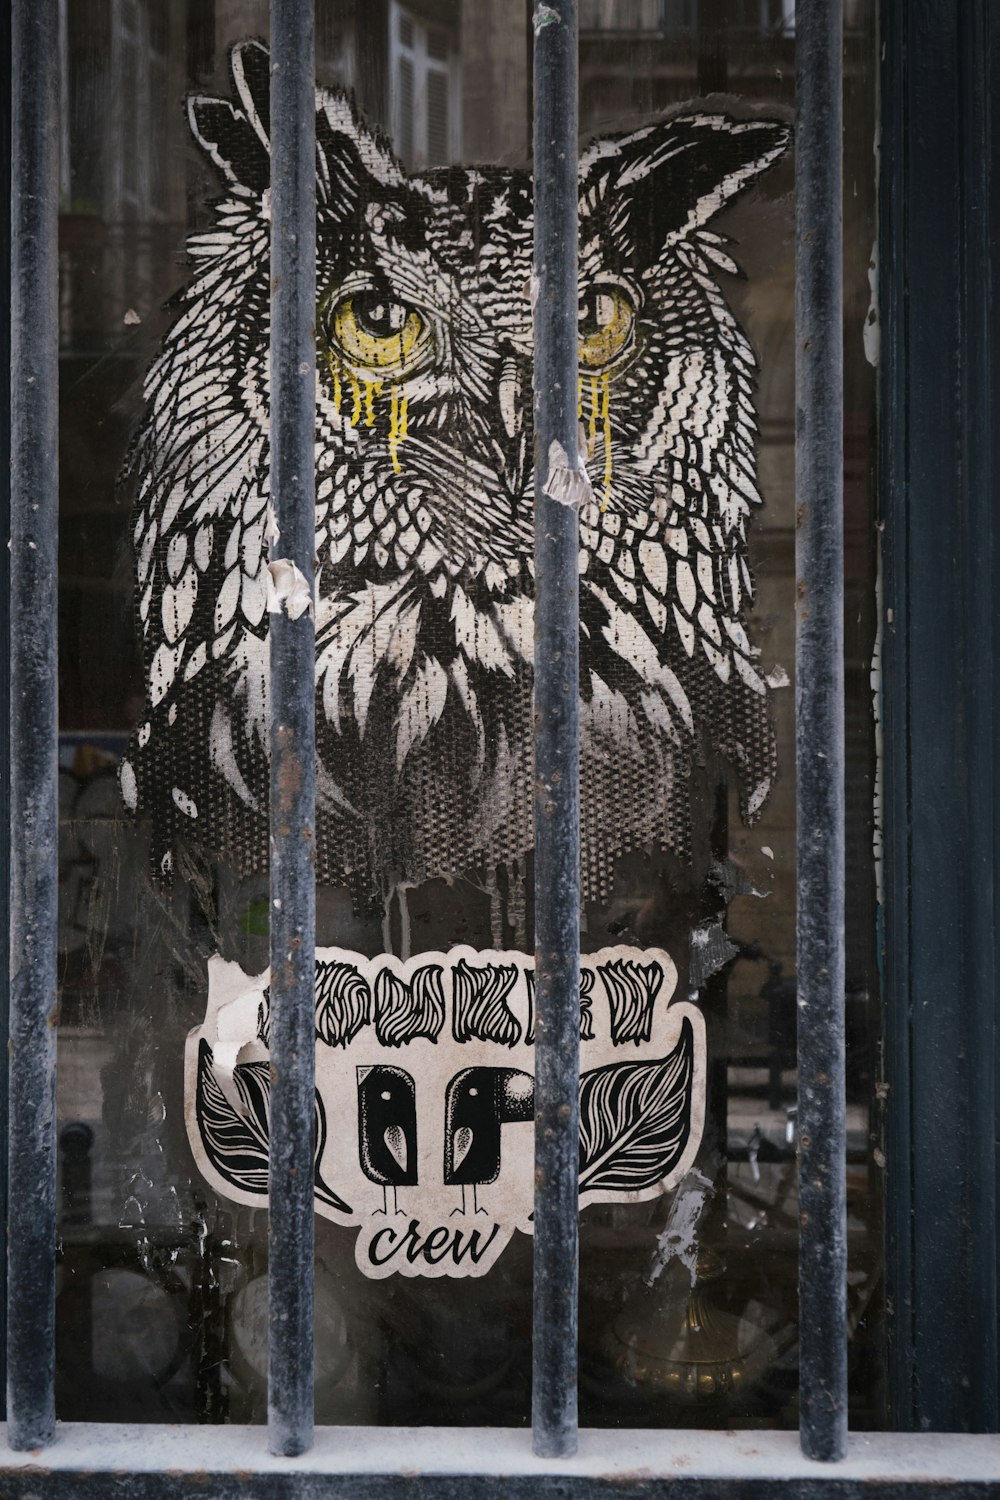 a window with a picture of an owl behind bars